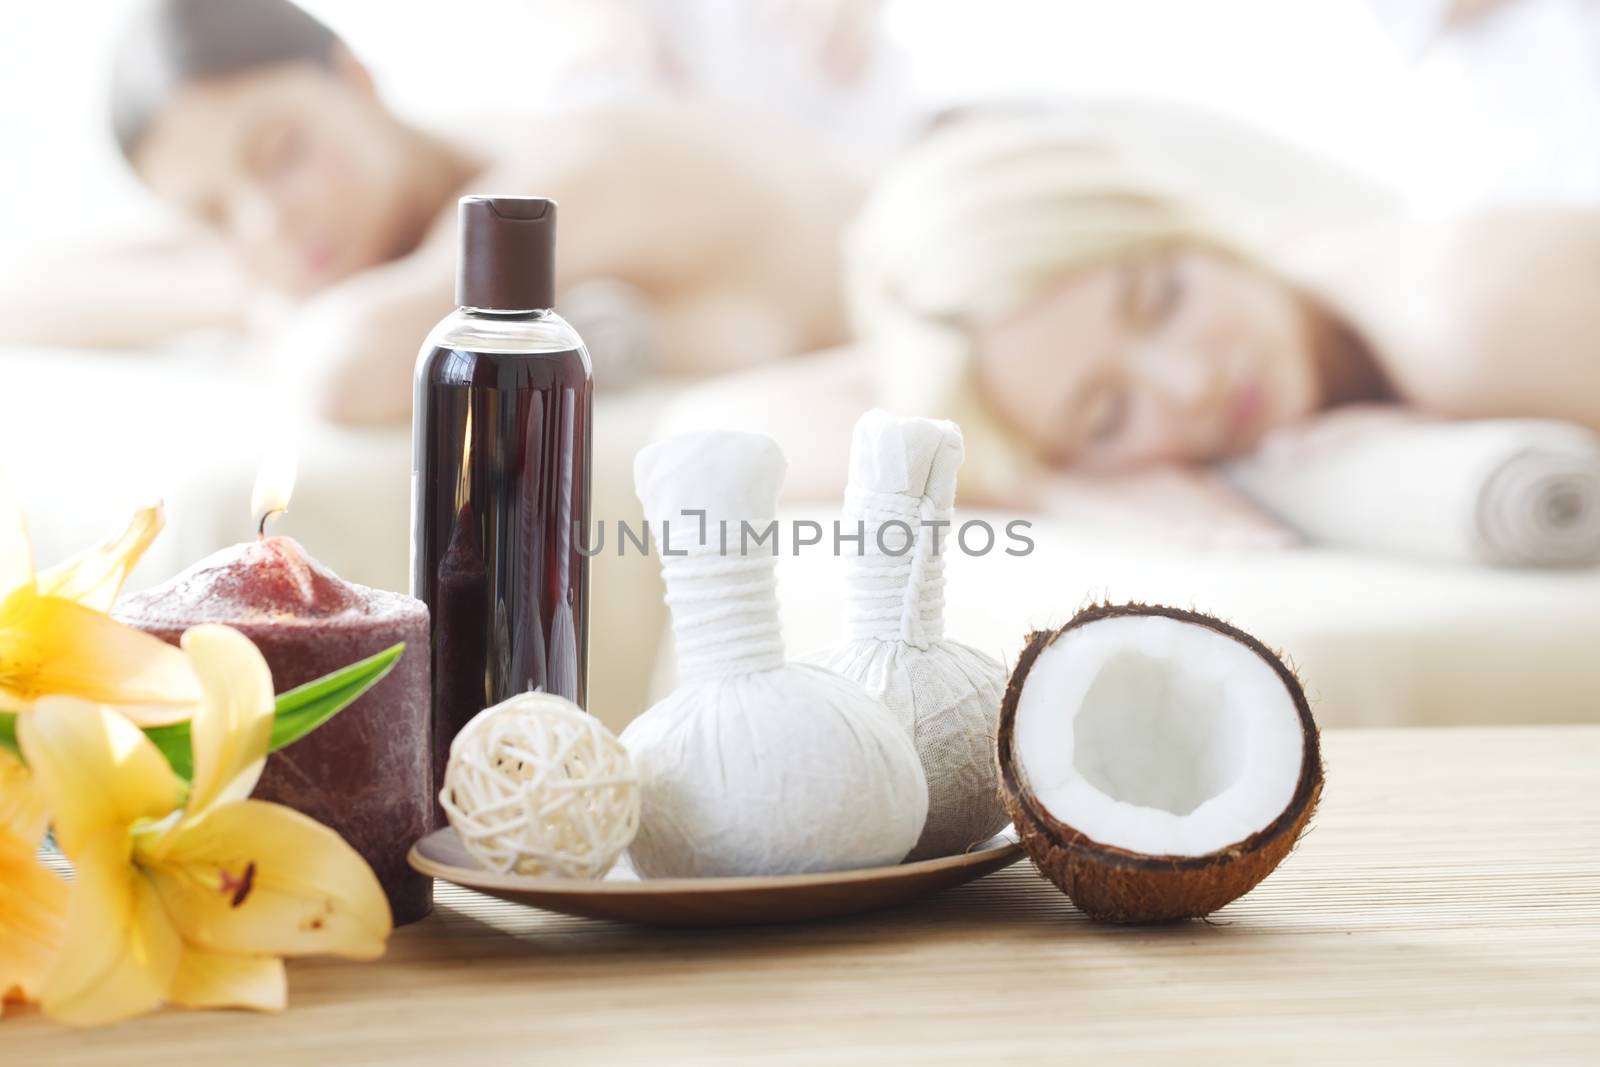 Spa massage tools and women getting massage on background